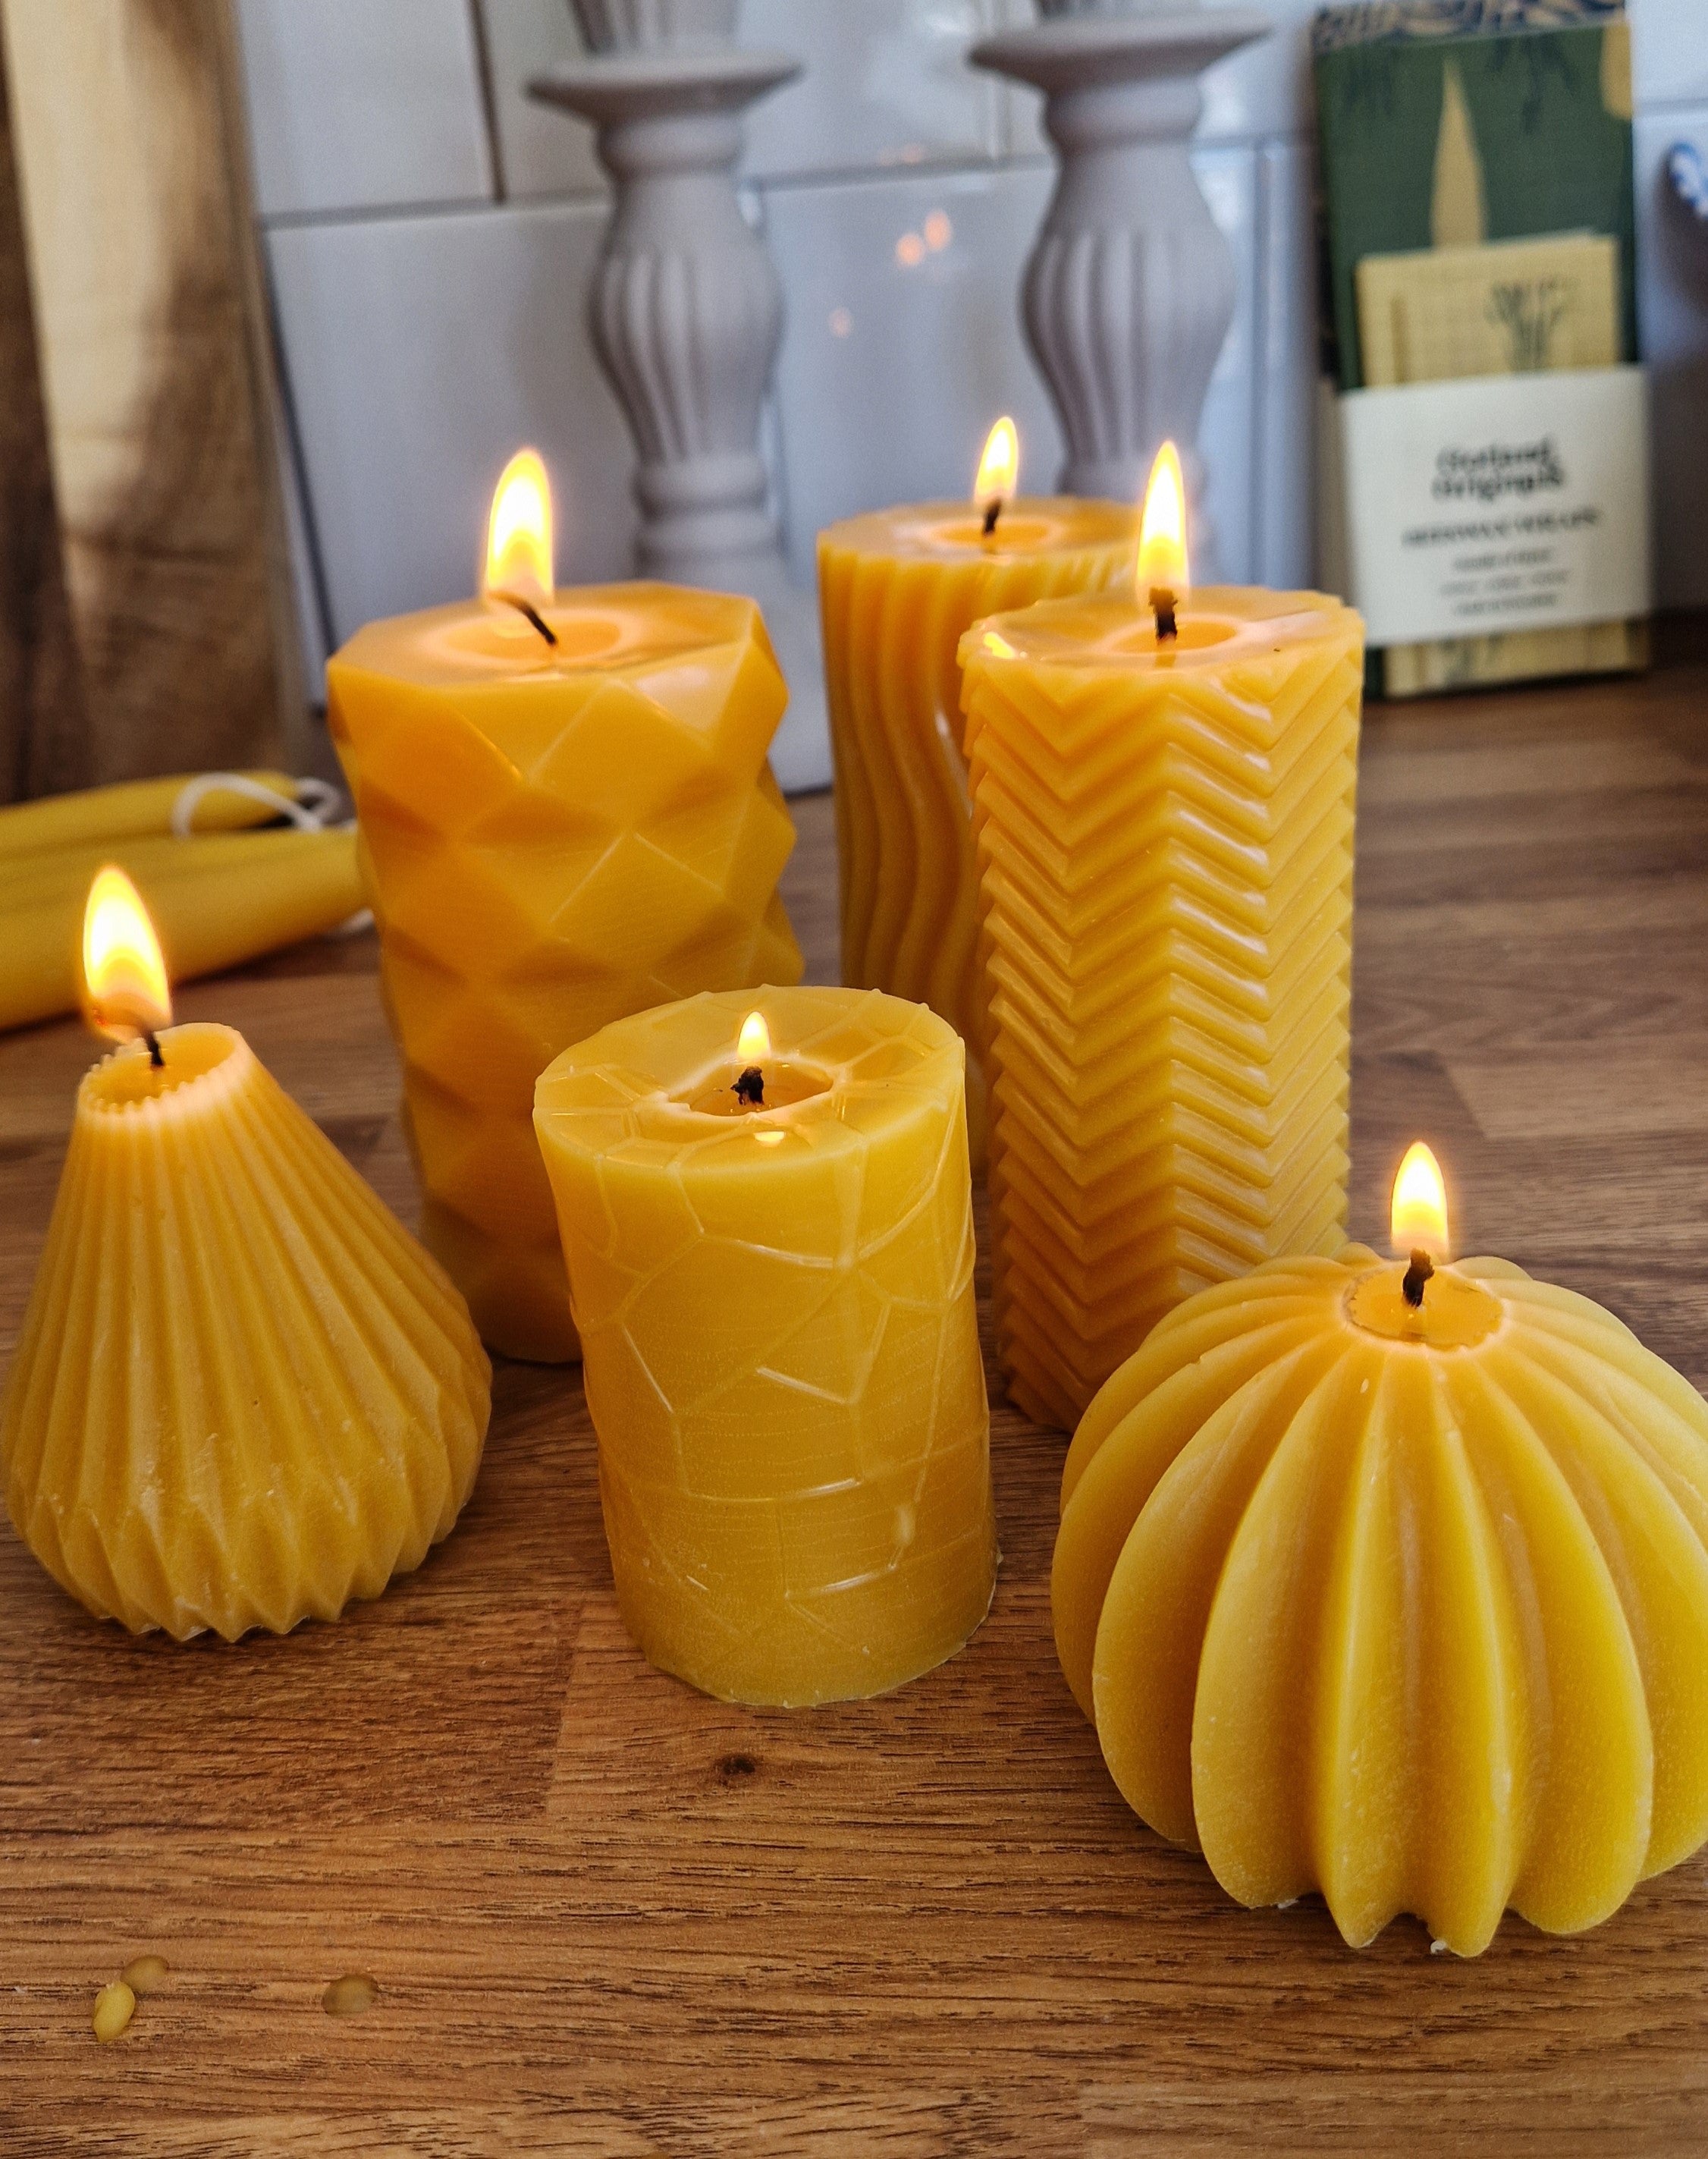 Beeswax candles from Gotland Originals